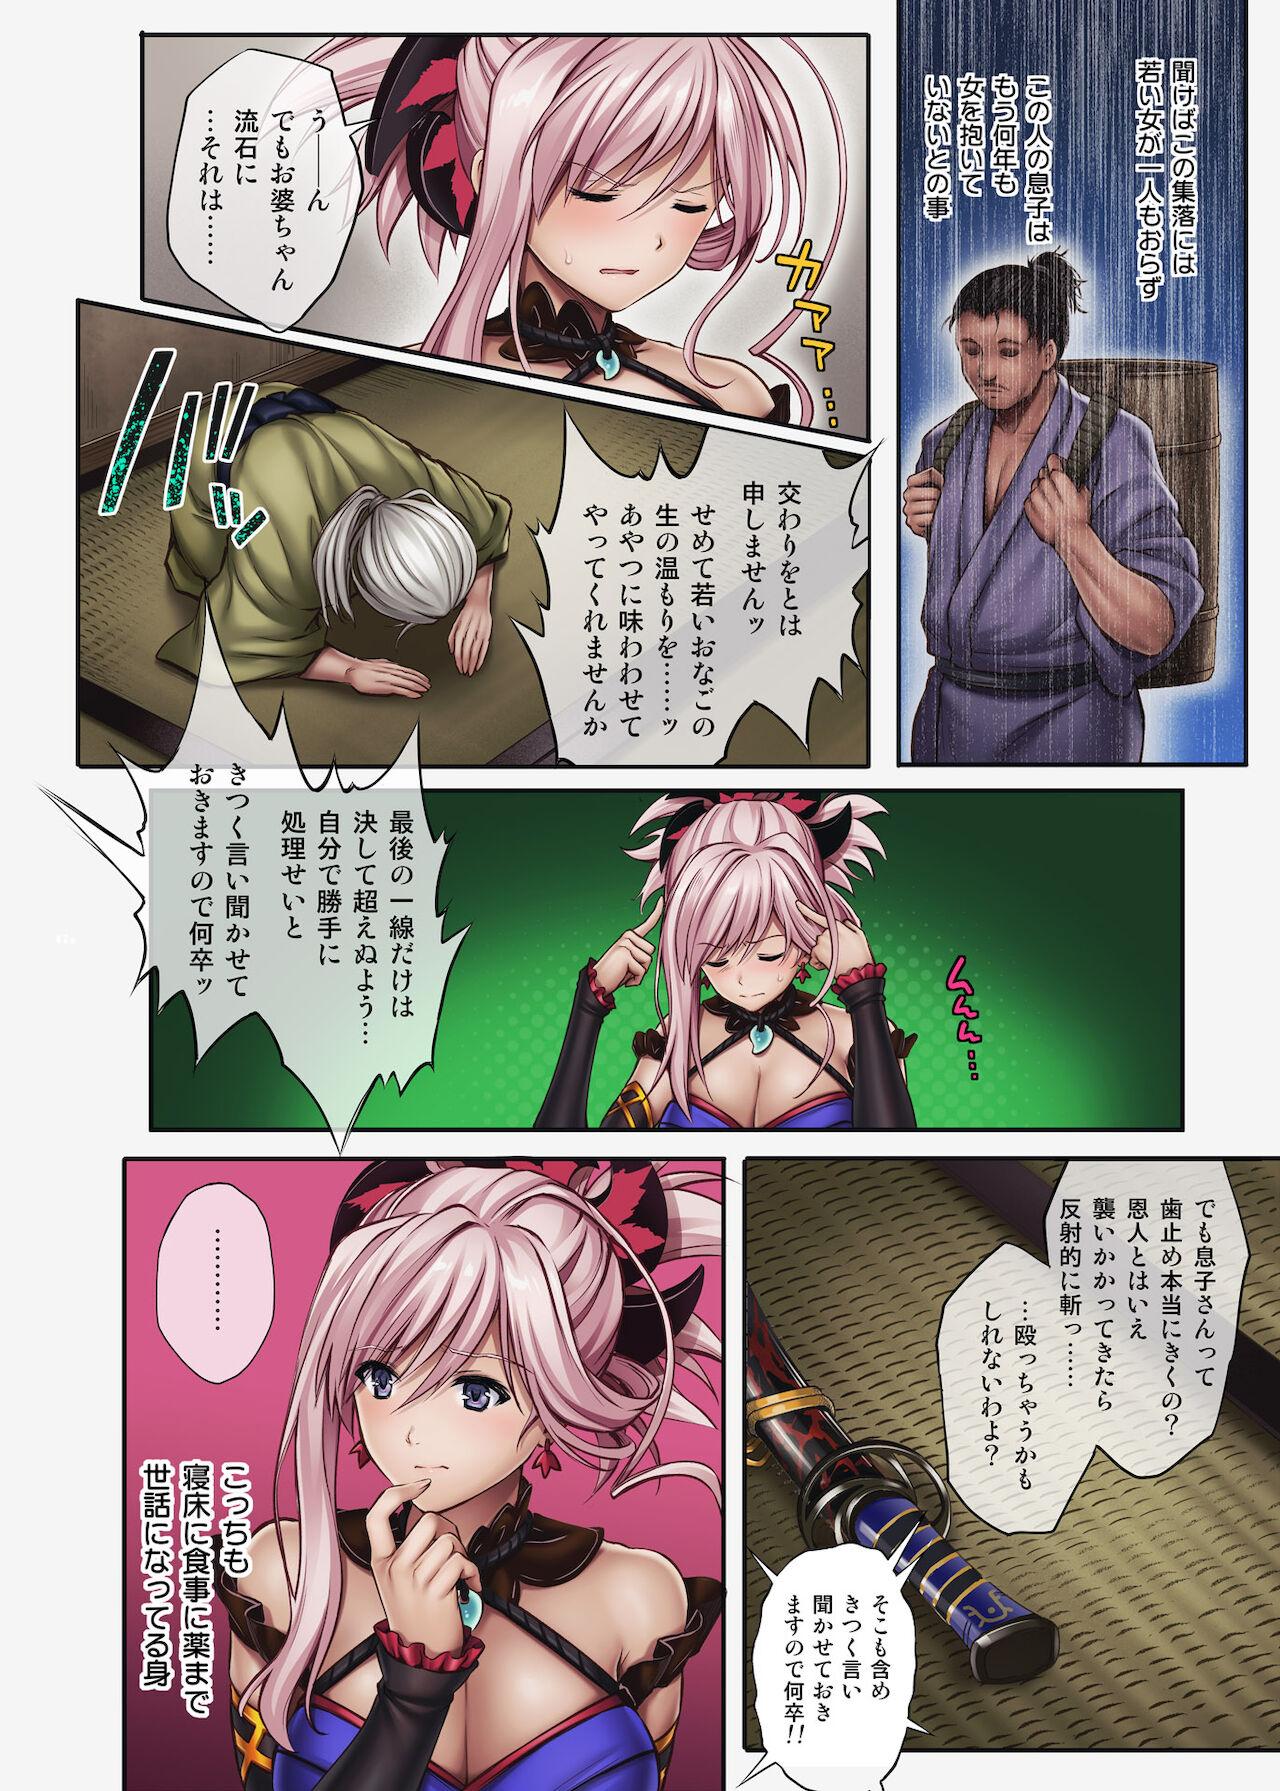 Gay Cyclone no Doujinshi Full Color Pack 4 - Fate grand order Boy - Page 9